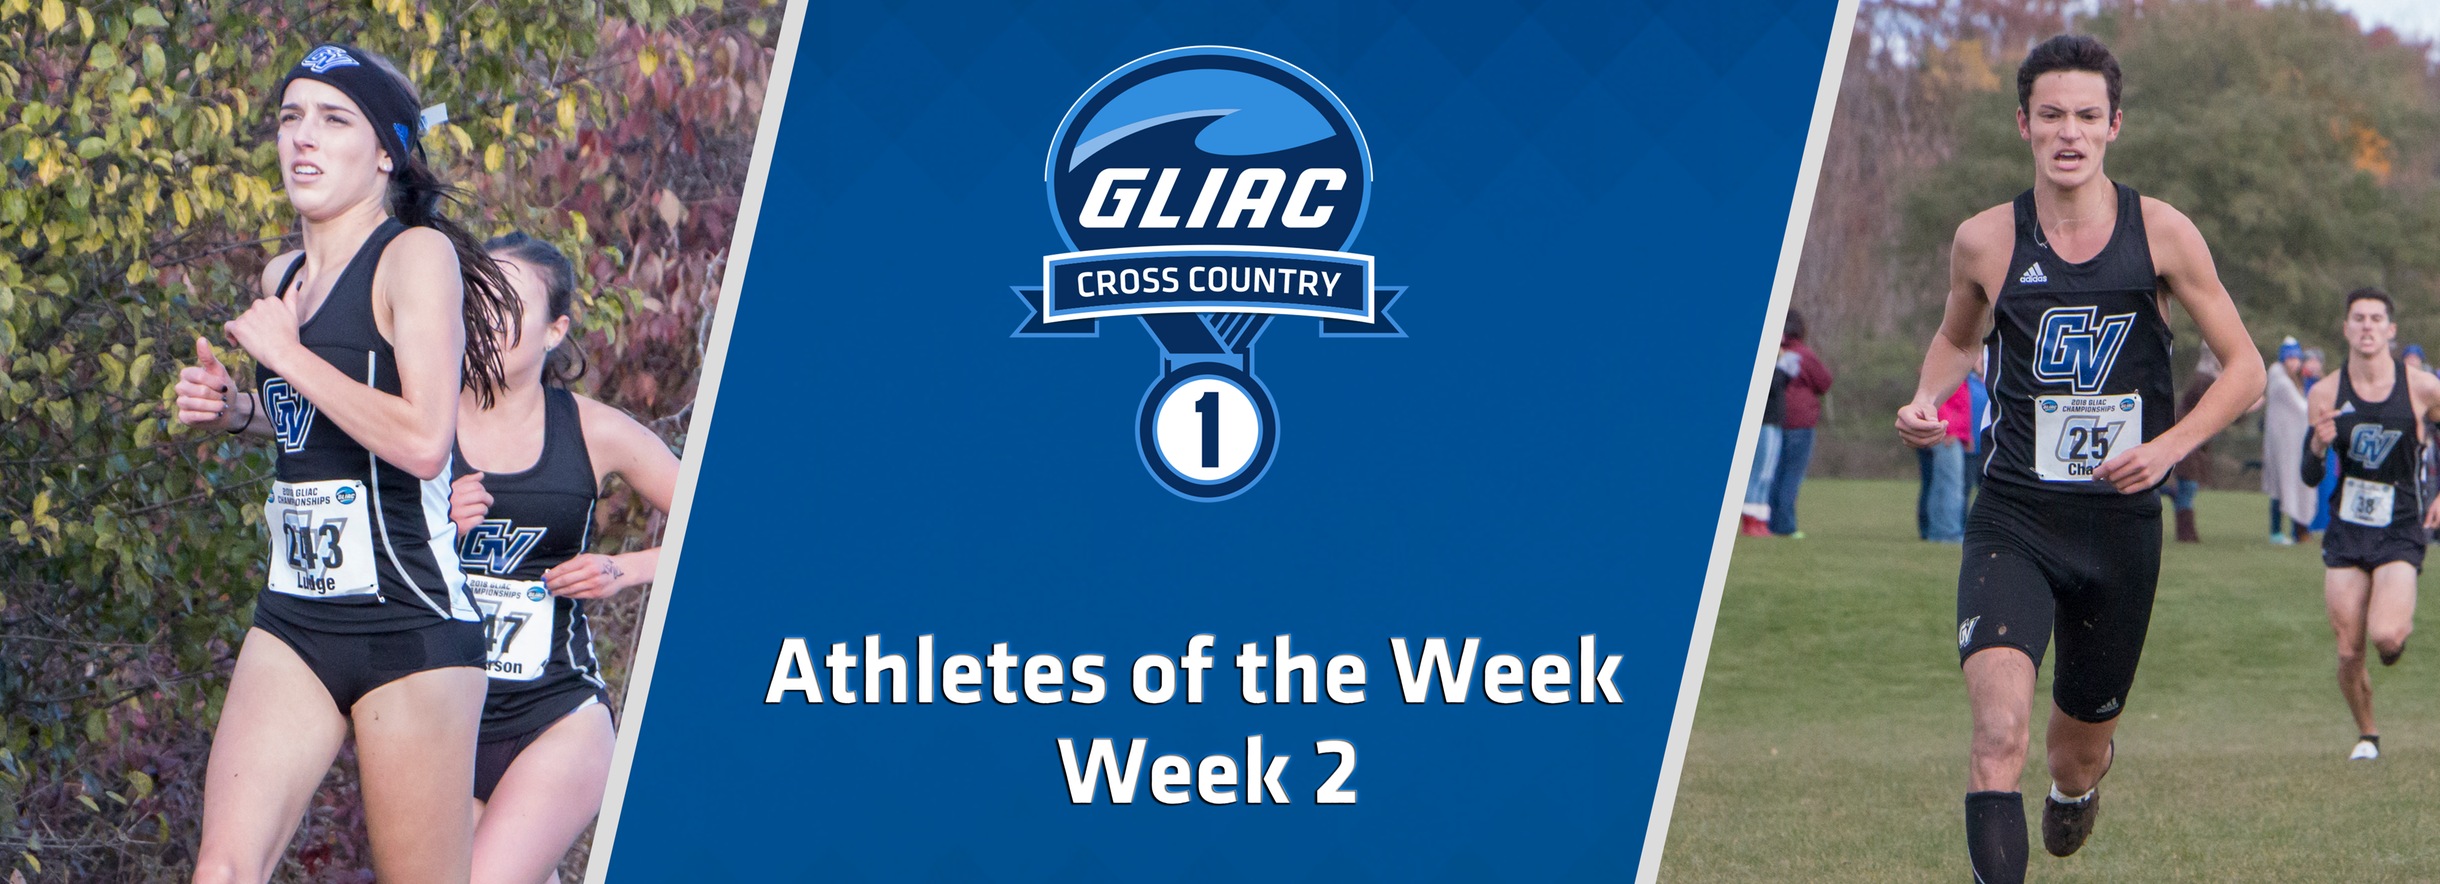 Grand Valley's Chada and Ludge Sweep GLIAC Cross Country Athlete of the Week Accolades